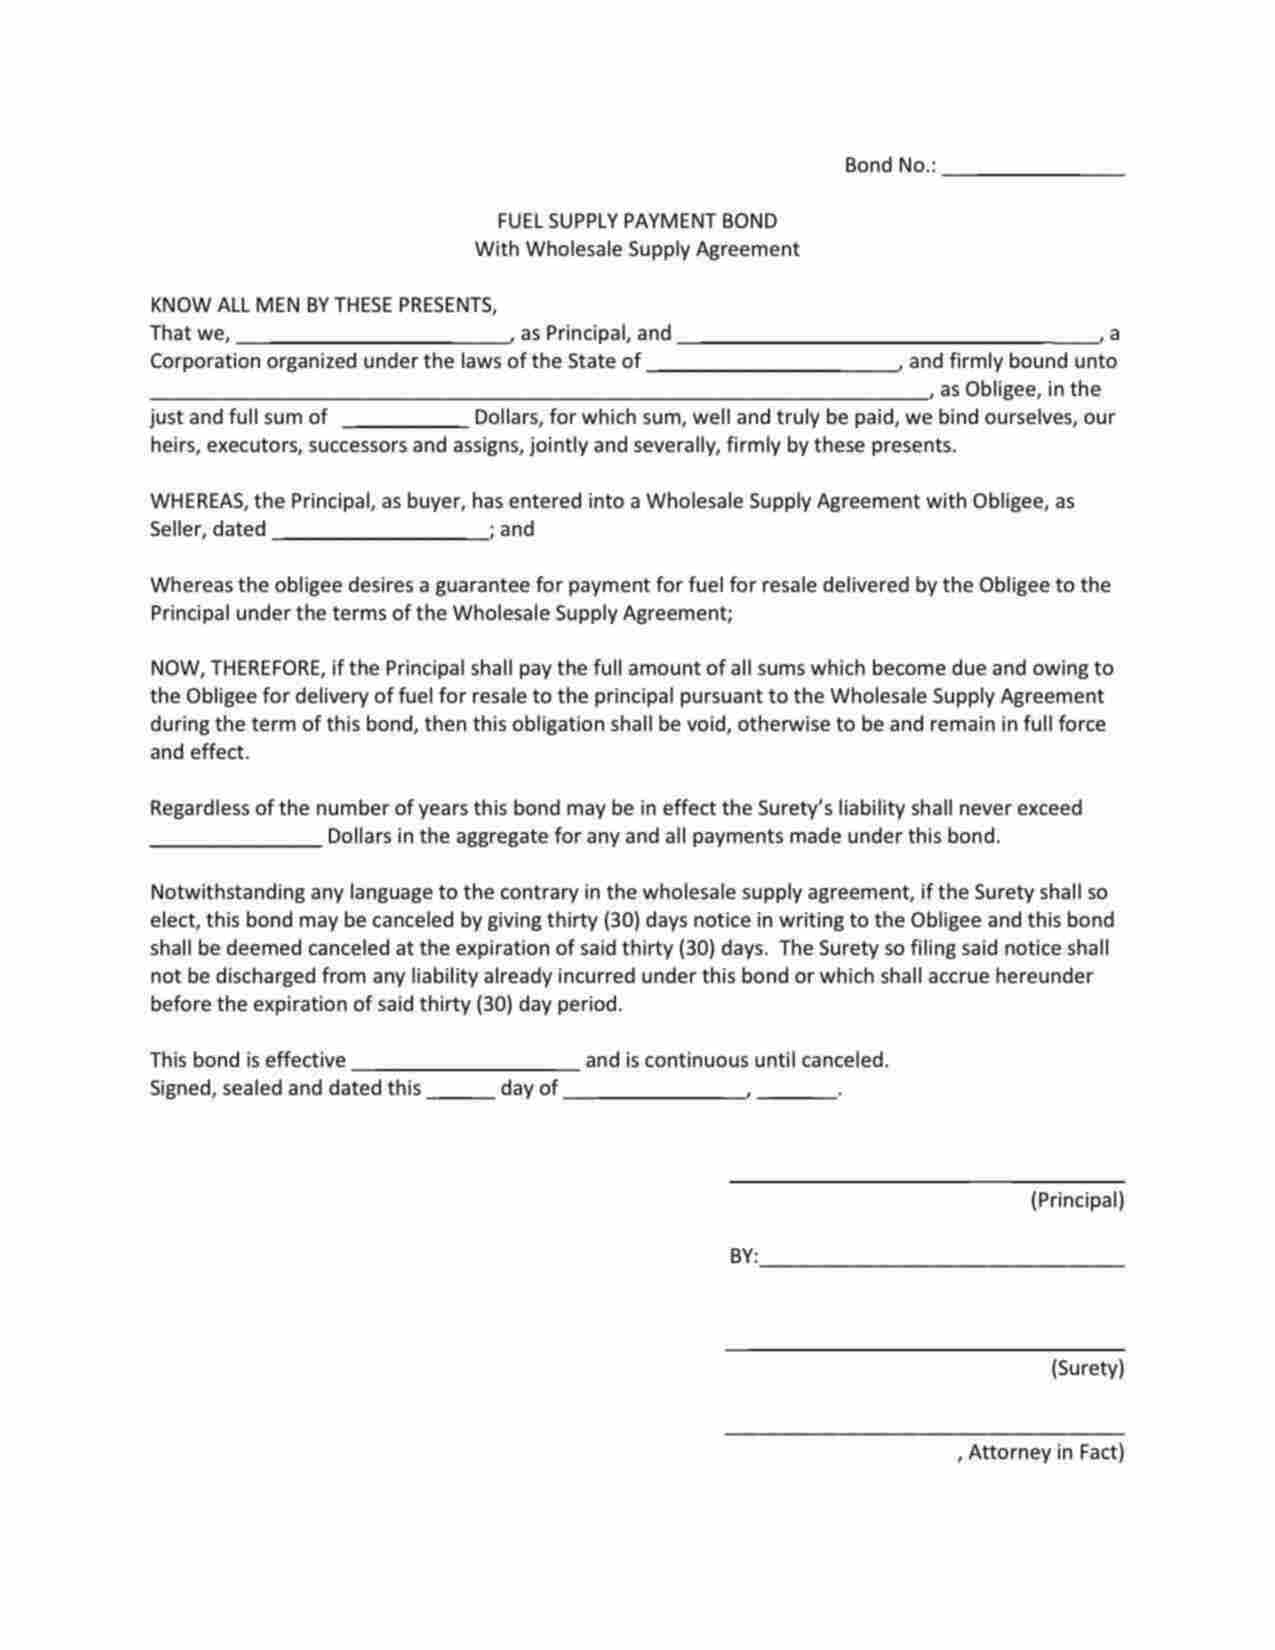 Tennessee Fuel Supply Payment Bond Form